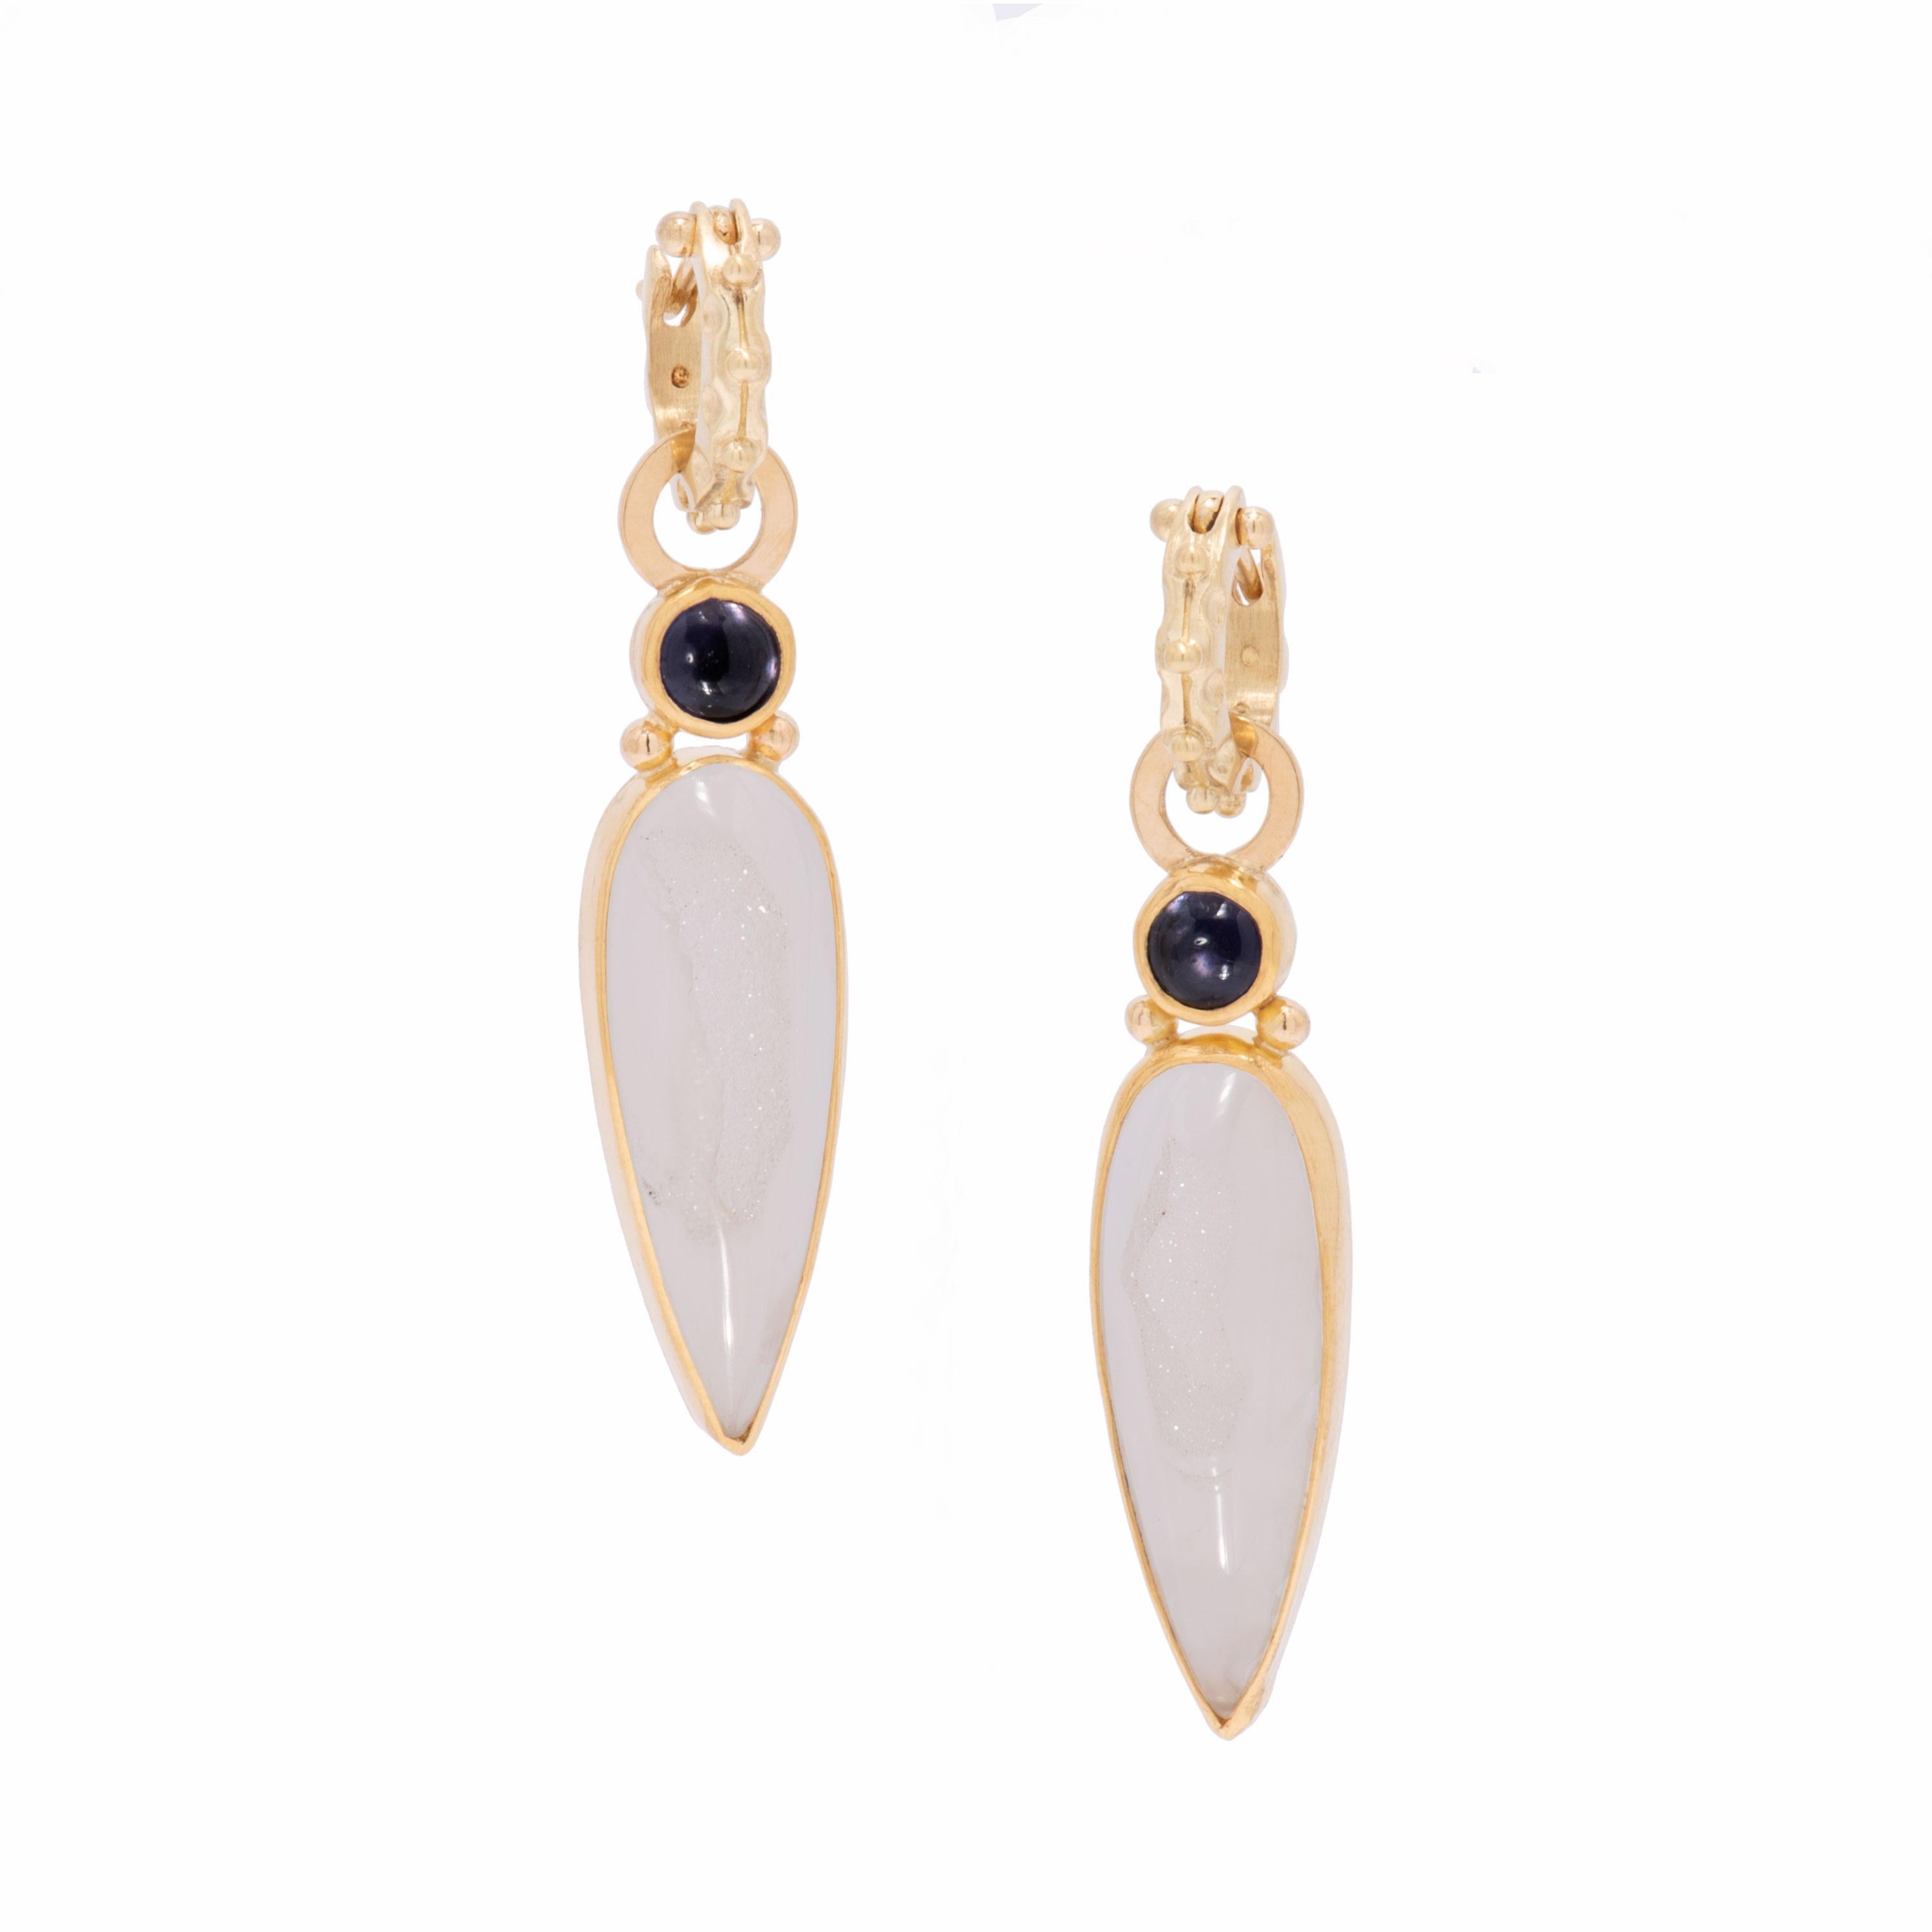 Long White Druzy Teardrop Earrings glitter below purple/blue iolite cabochons and command notice. Set in 18 karat gold with our signature satin finish, the centers of teardrop white agate are scarred to reveal the sandy, glittering druzy beneath.